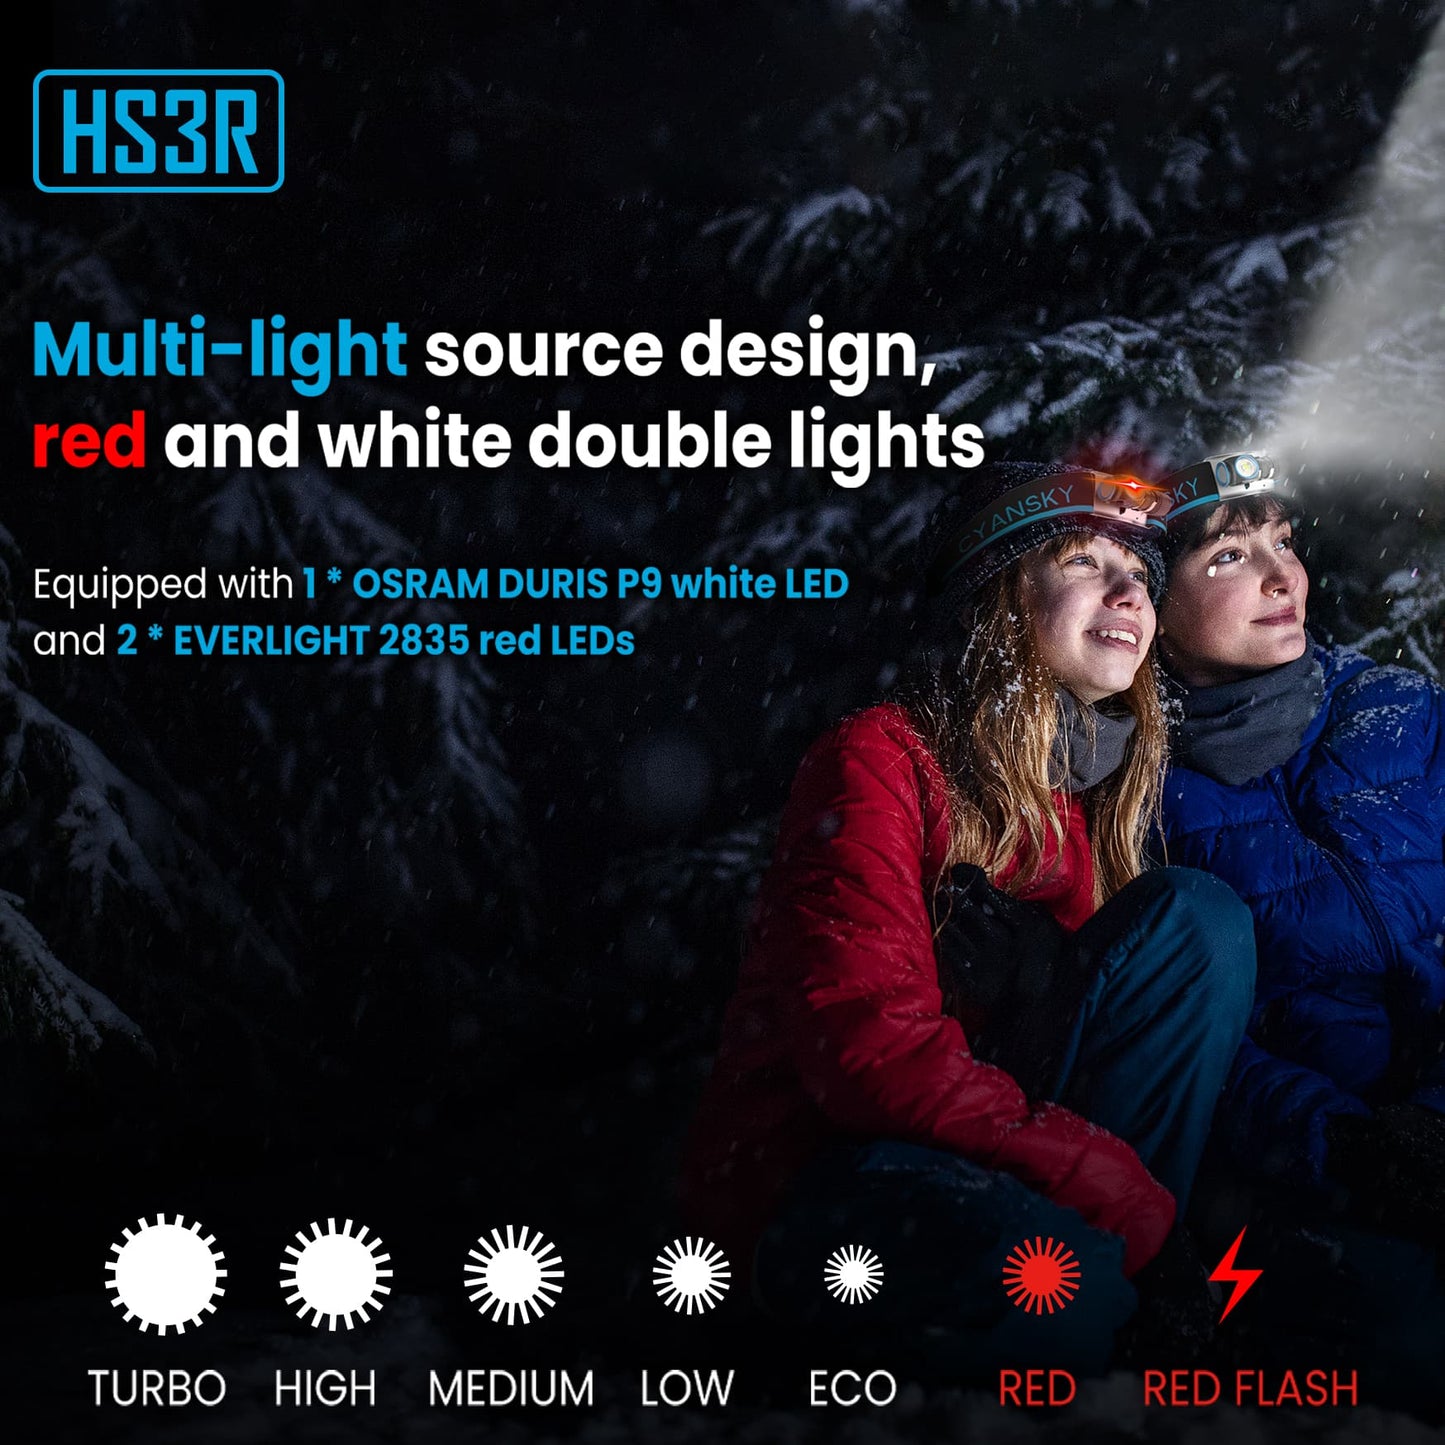 flashlights for camping, flashlights for hiking, rechargeable flashlights high lumens, Helius, Cyansky, headlamps for adults rechargeable, headlamp flashlight, running headlamp, headlamp camping